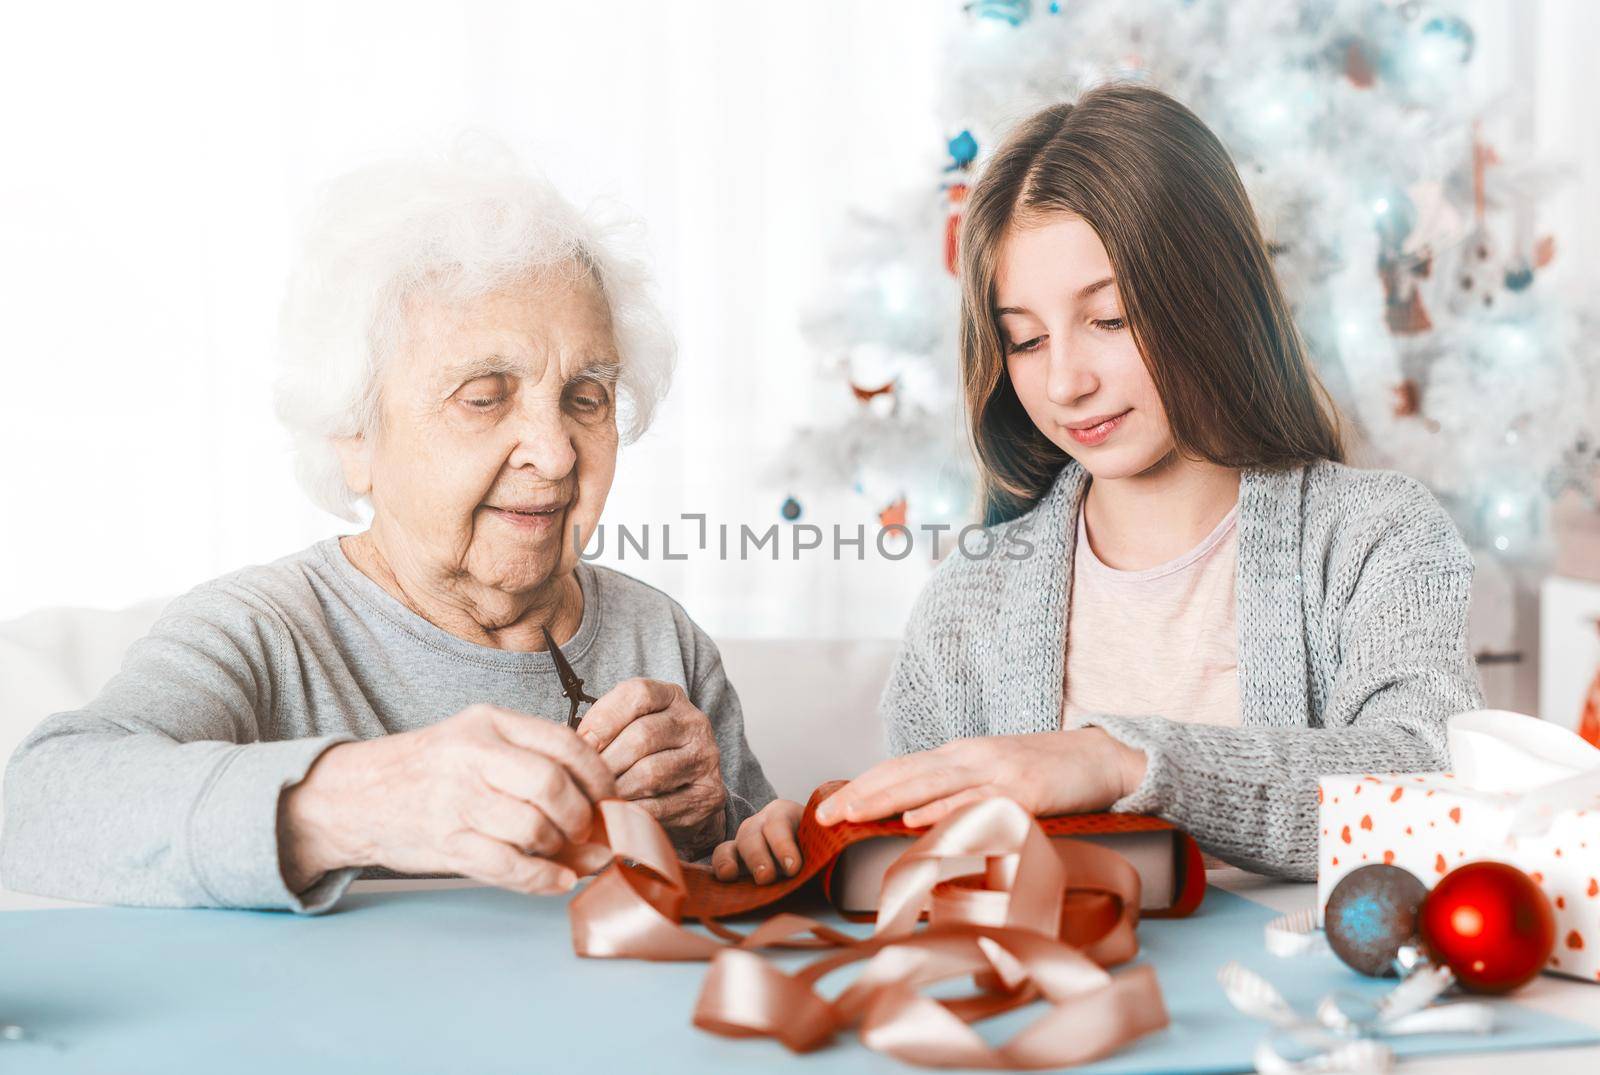 Smiling grandmother with granddaughter decorating gifts with purple paper together at Christmas